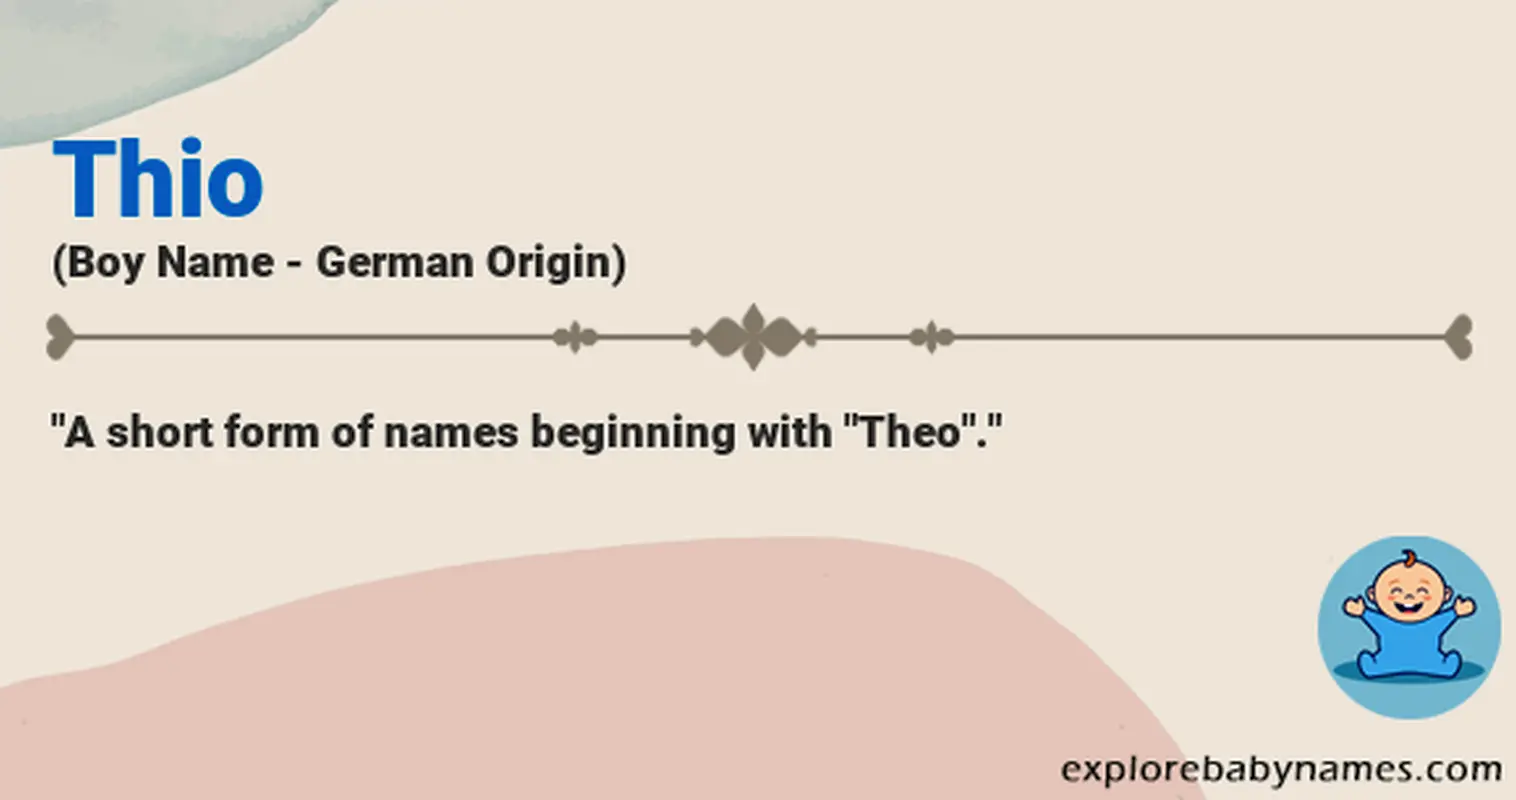 Meaning of Thio